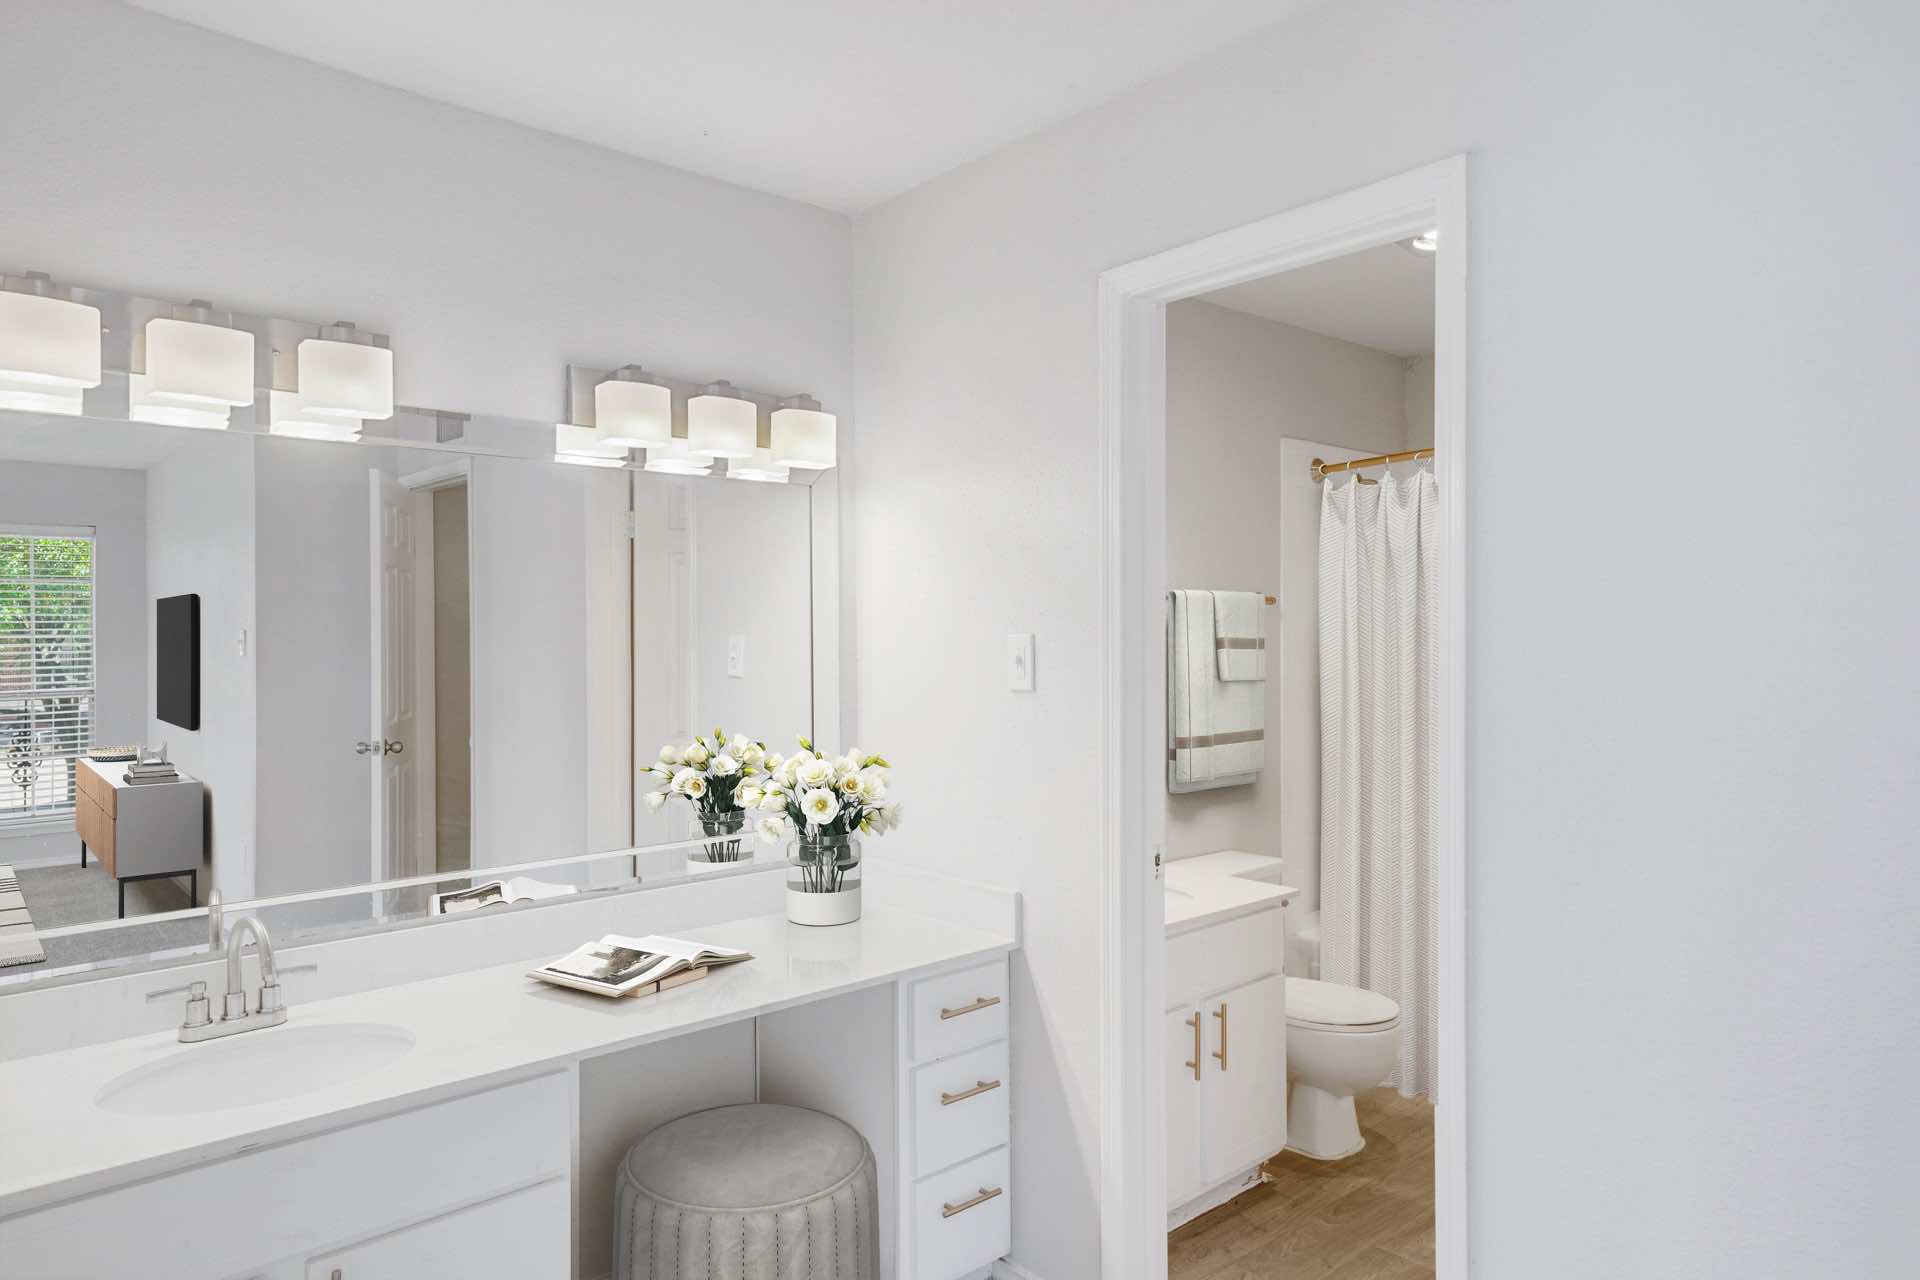 large mirror in bathroom and plenty of counter space